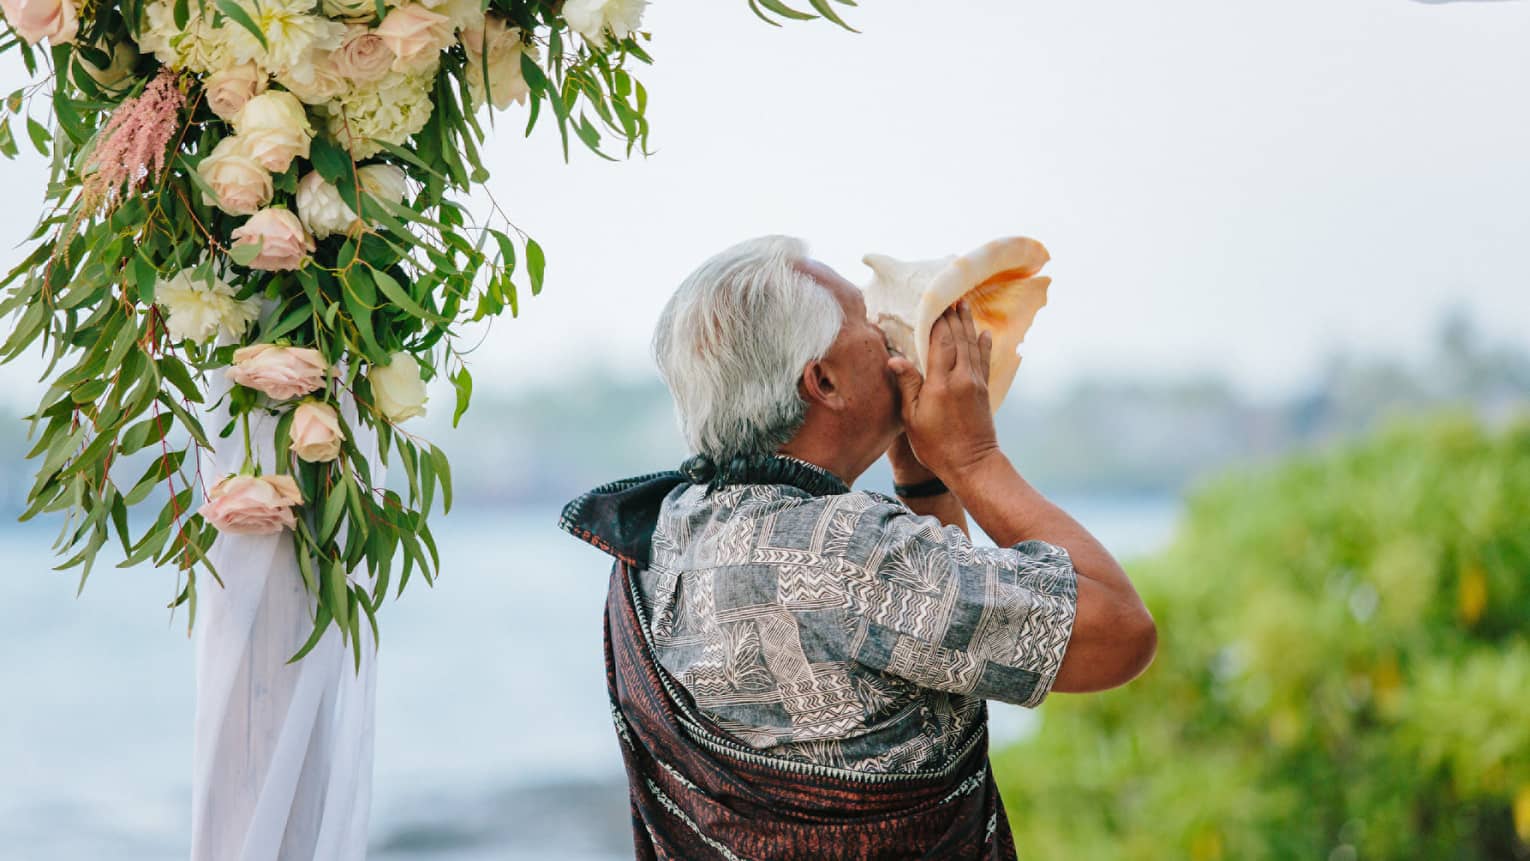 Man holds large seashell to lips at outdoor wedding ceremony